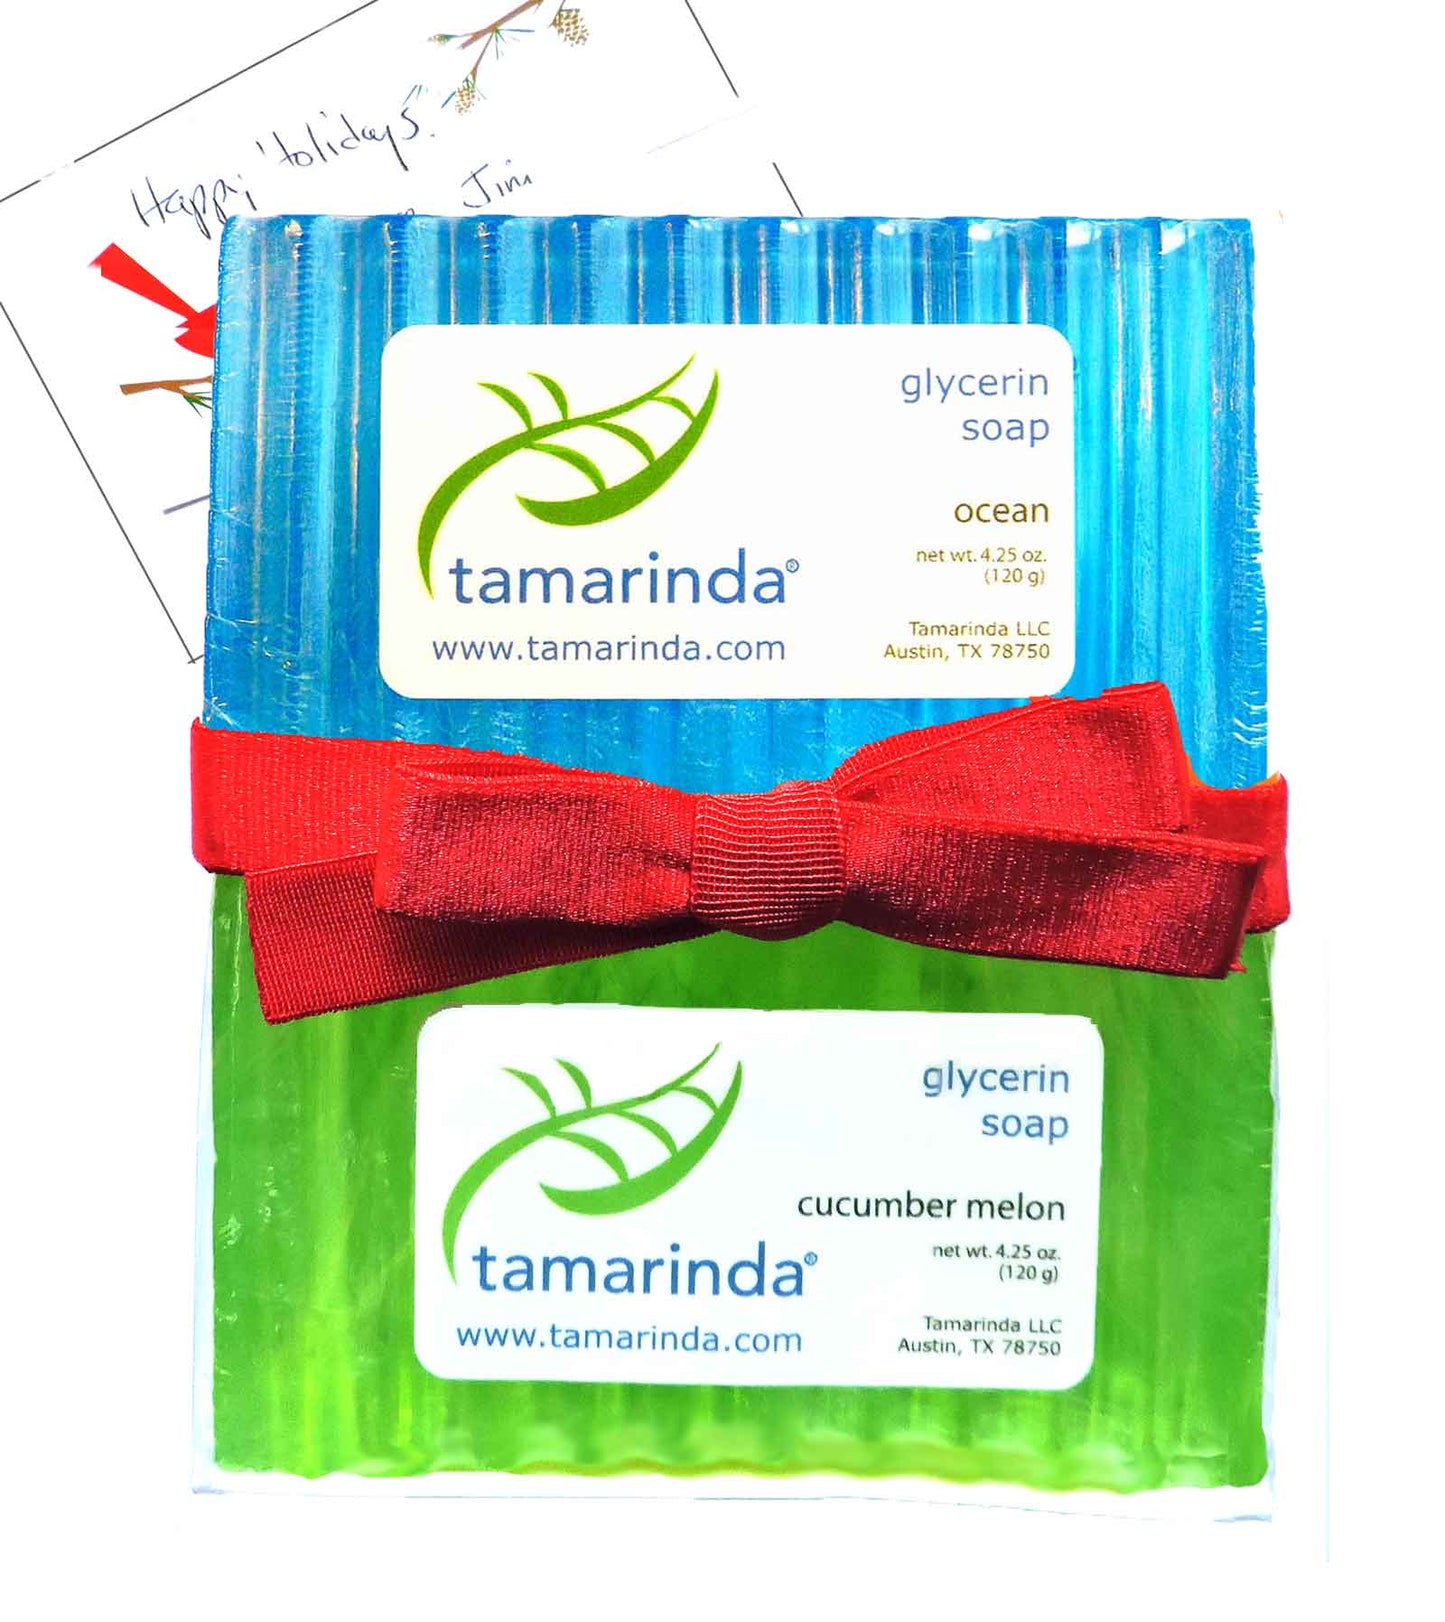 Tamarinda glycerin soap 4 pack gift - in a variety of scents.